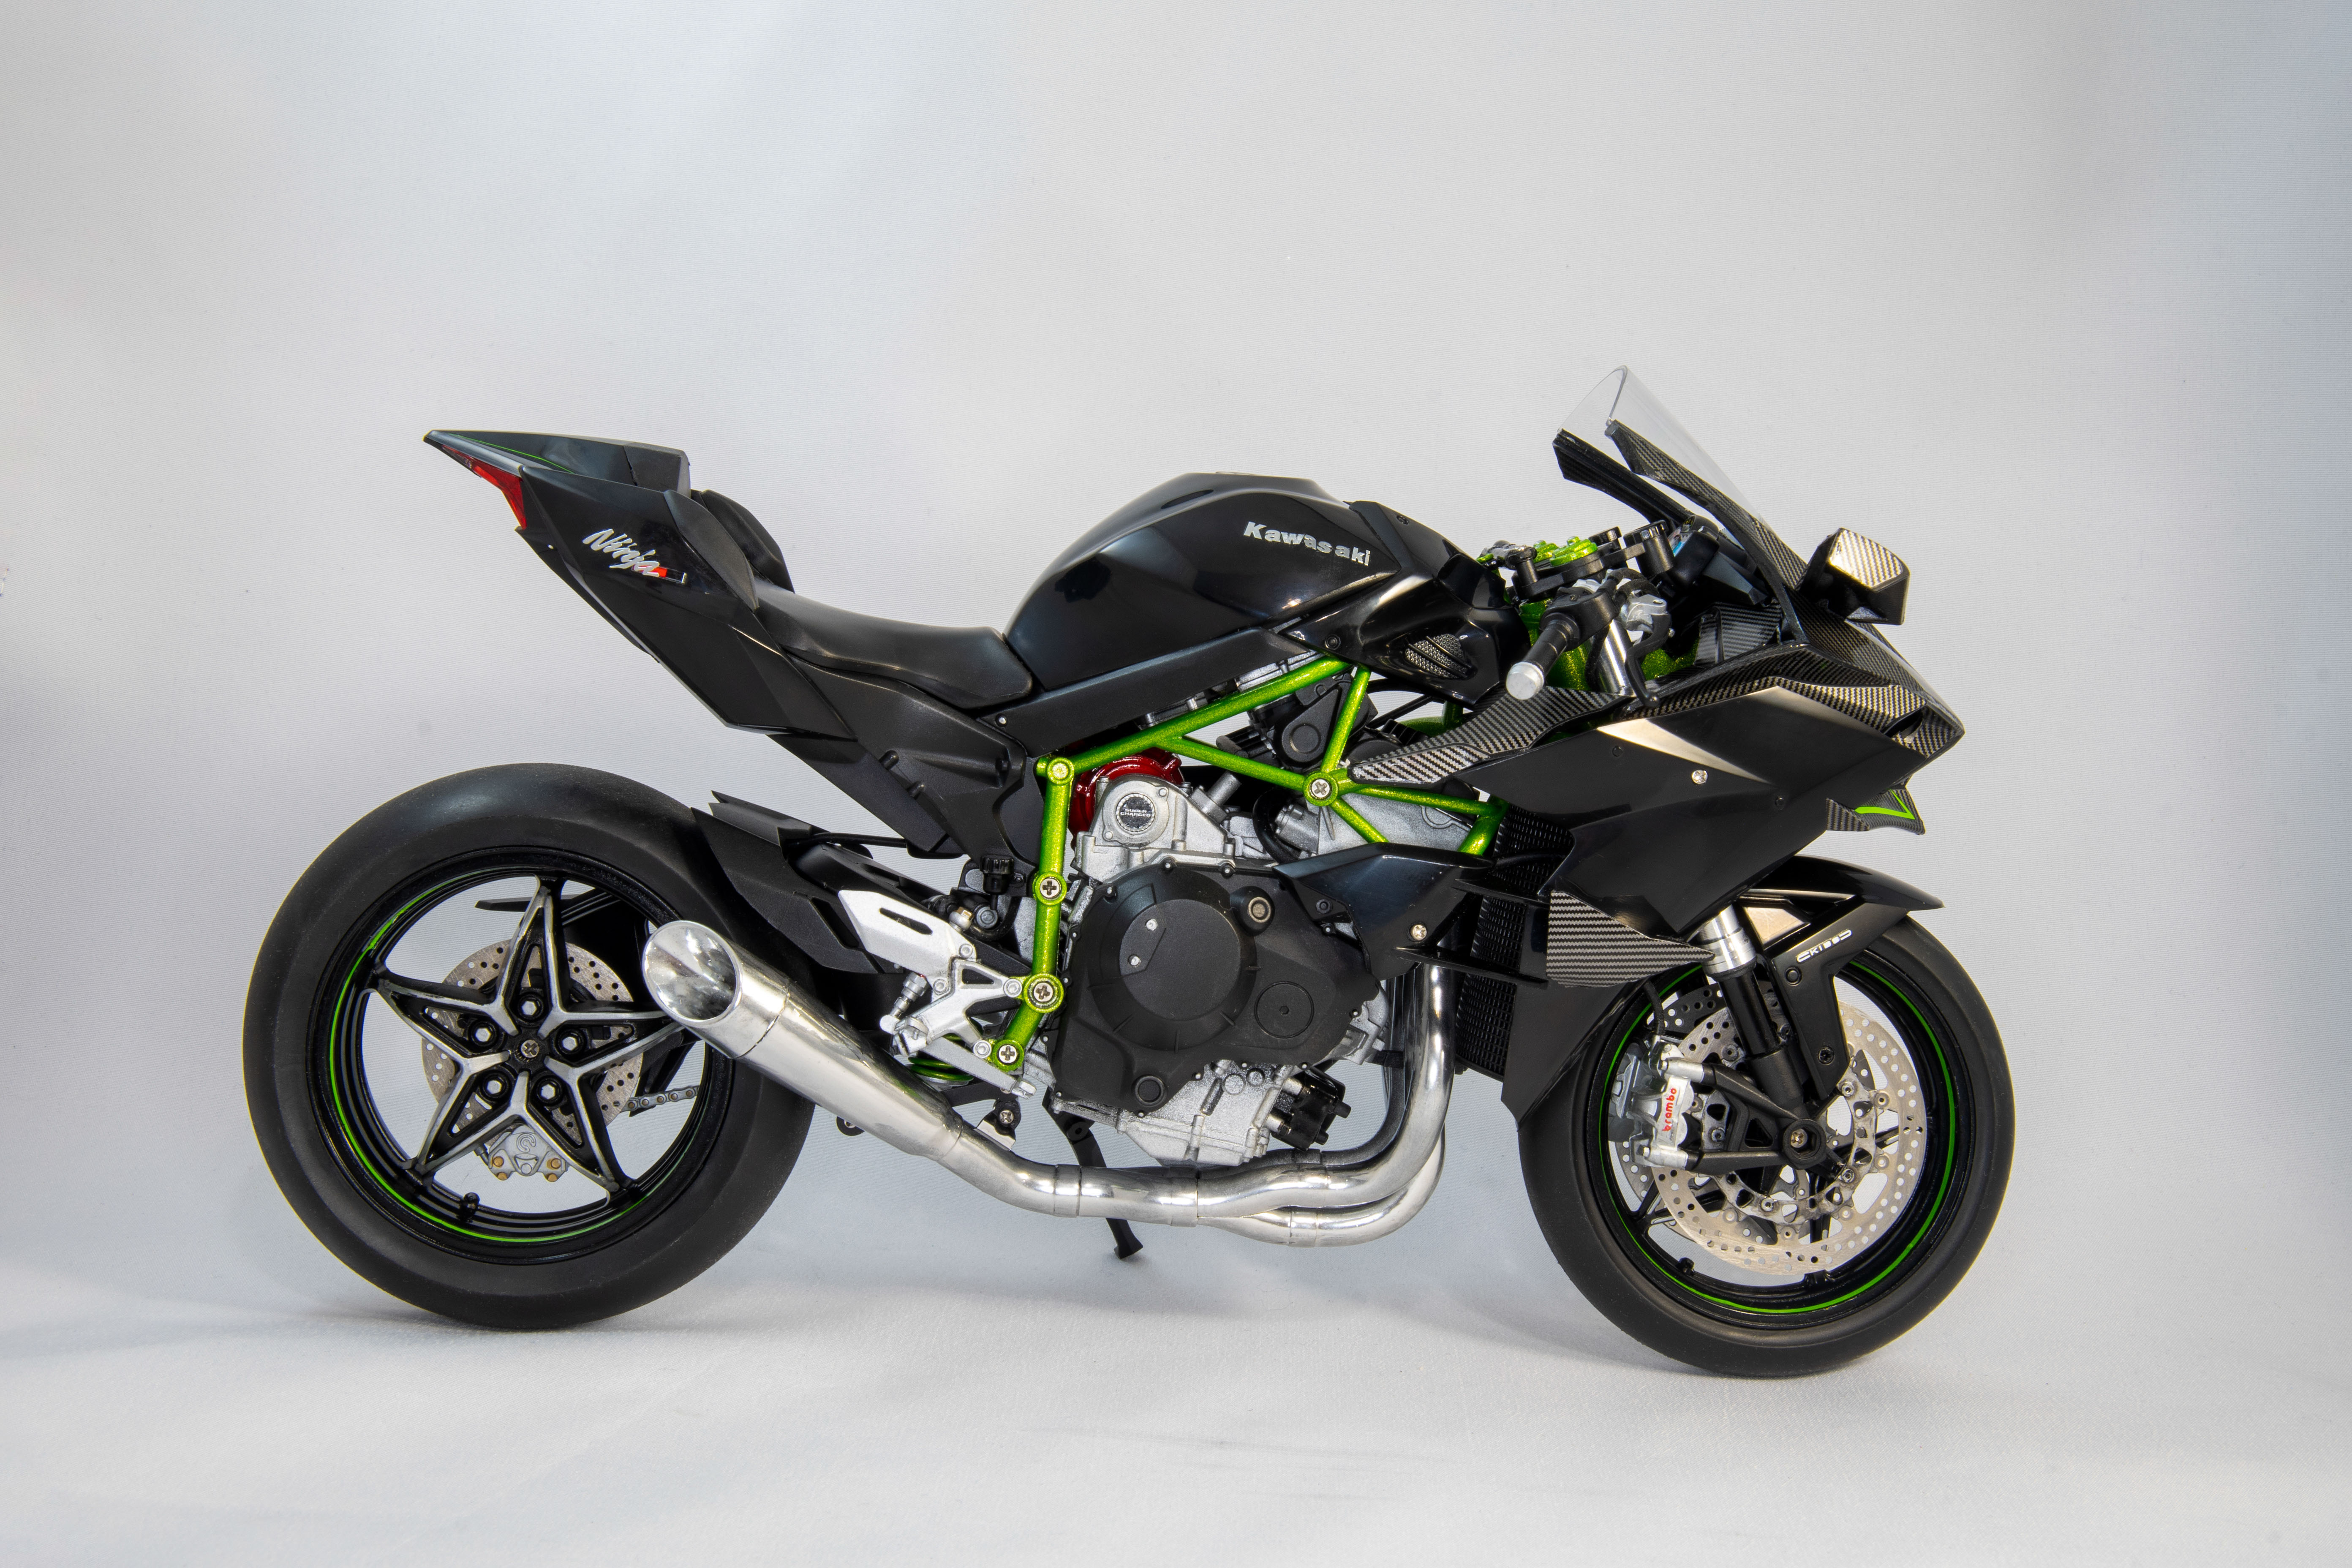 Build review of the Kawasaki scale model motorcycle kit | FineScale Modeler